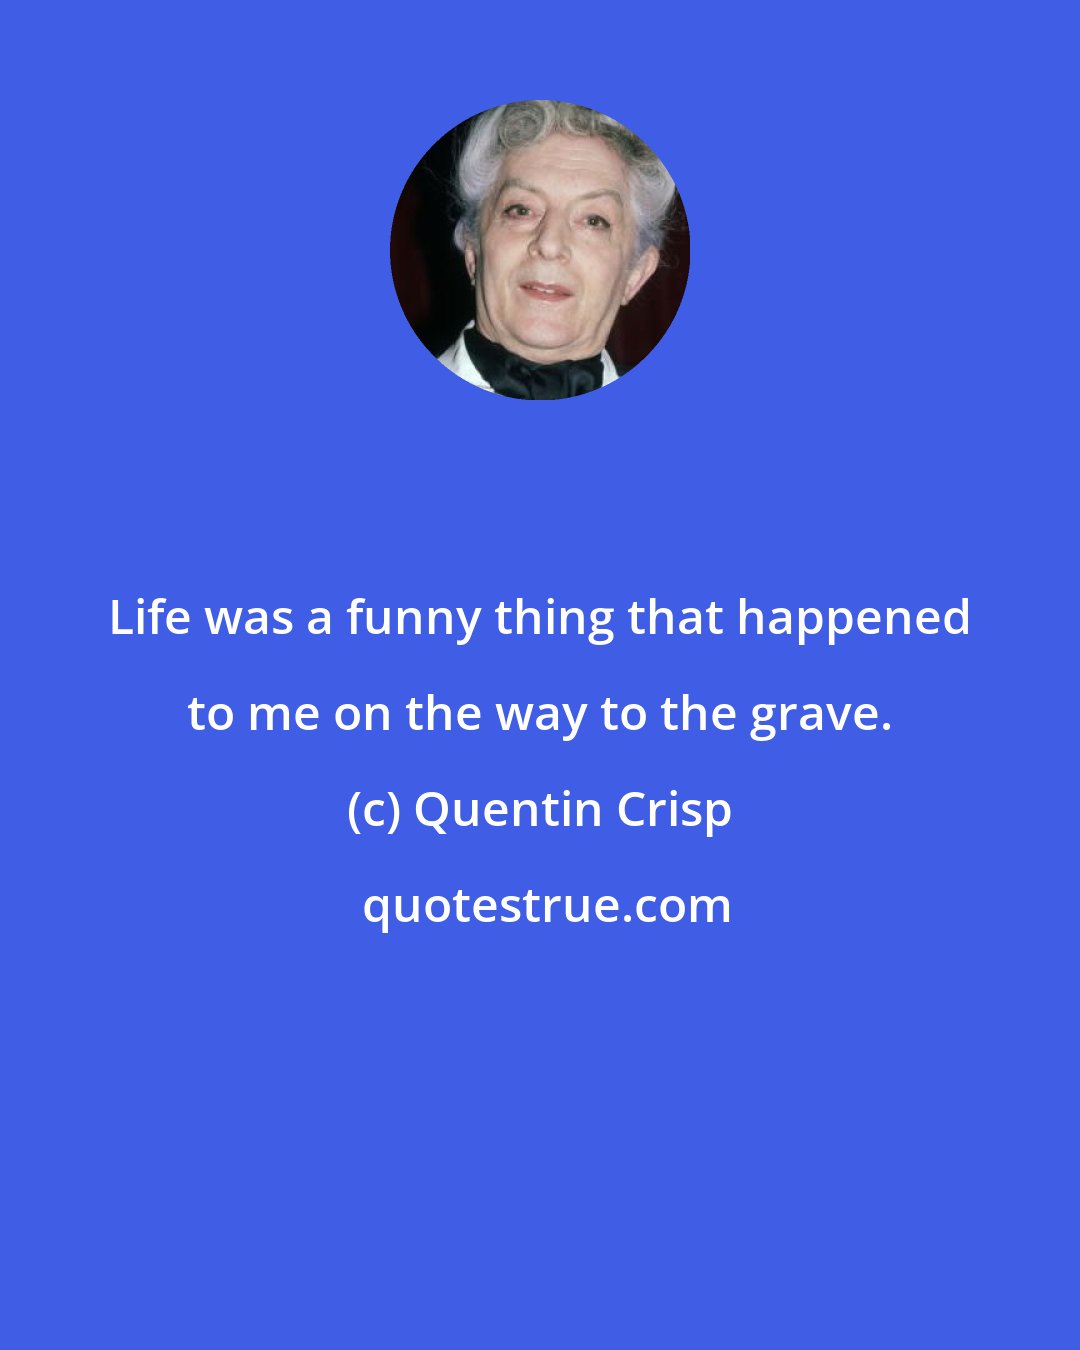 Quentin Crisp: Life was a funny thing that happened to me on the way to the grave.